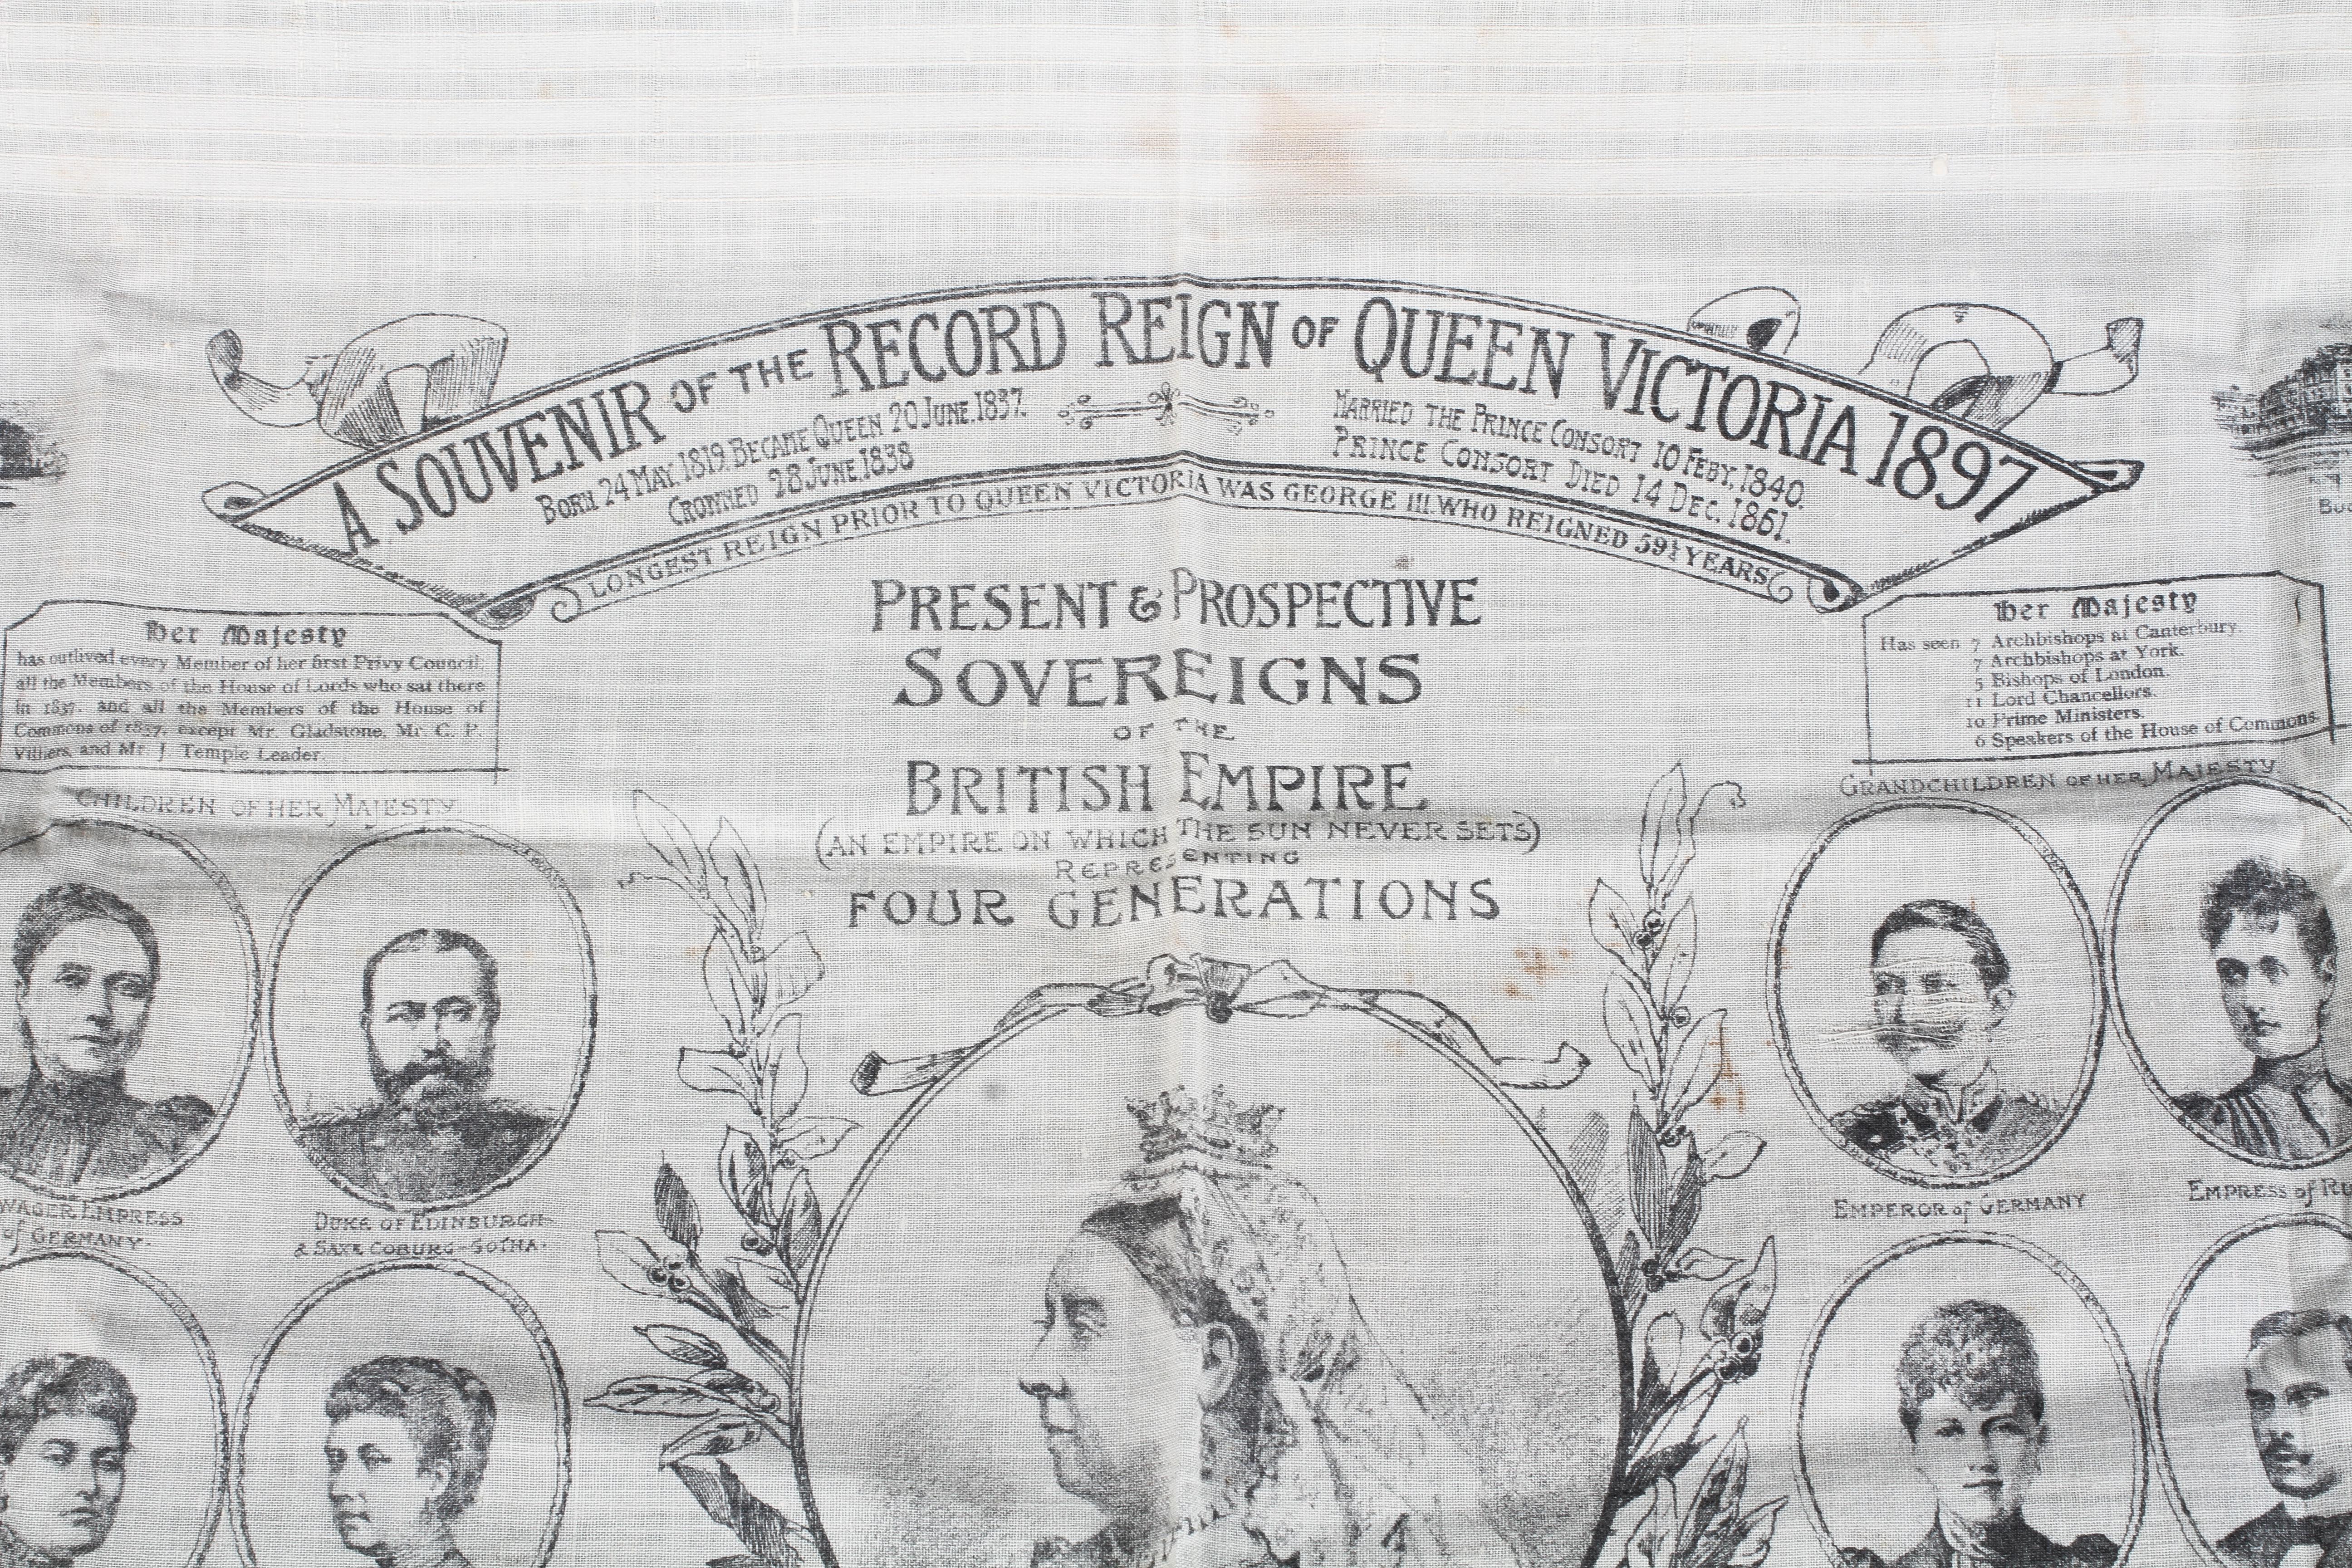 A white cotton handkerchief marked with the title 'A Souvenir of the Record Reign of Queen Victoria, - Image 2 of 2